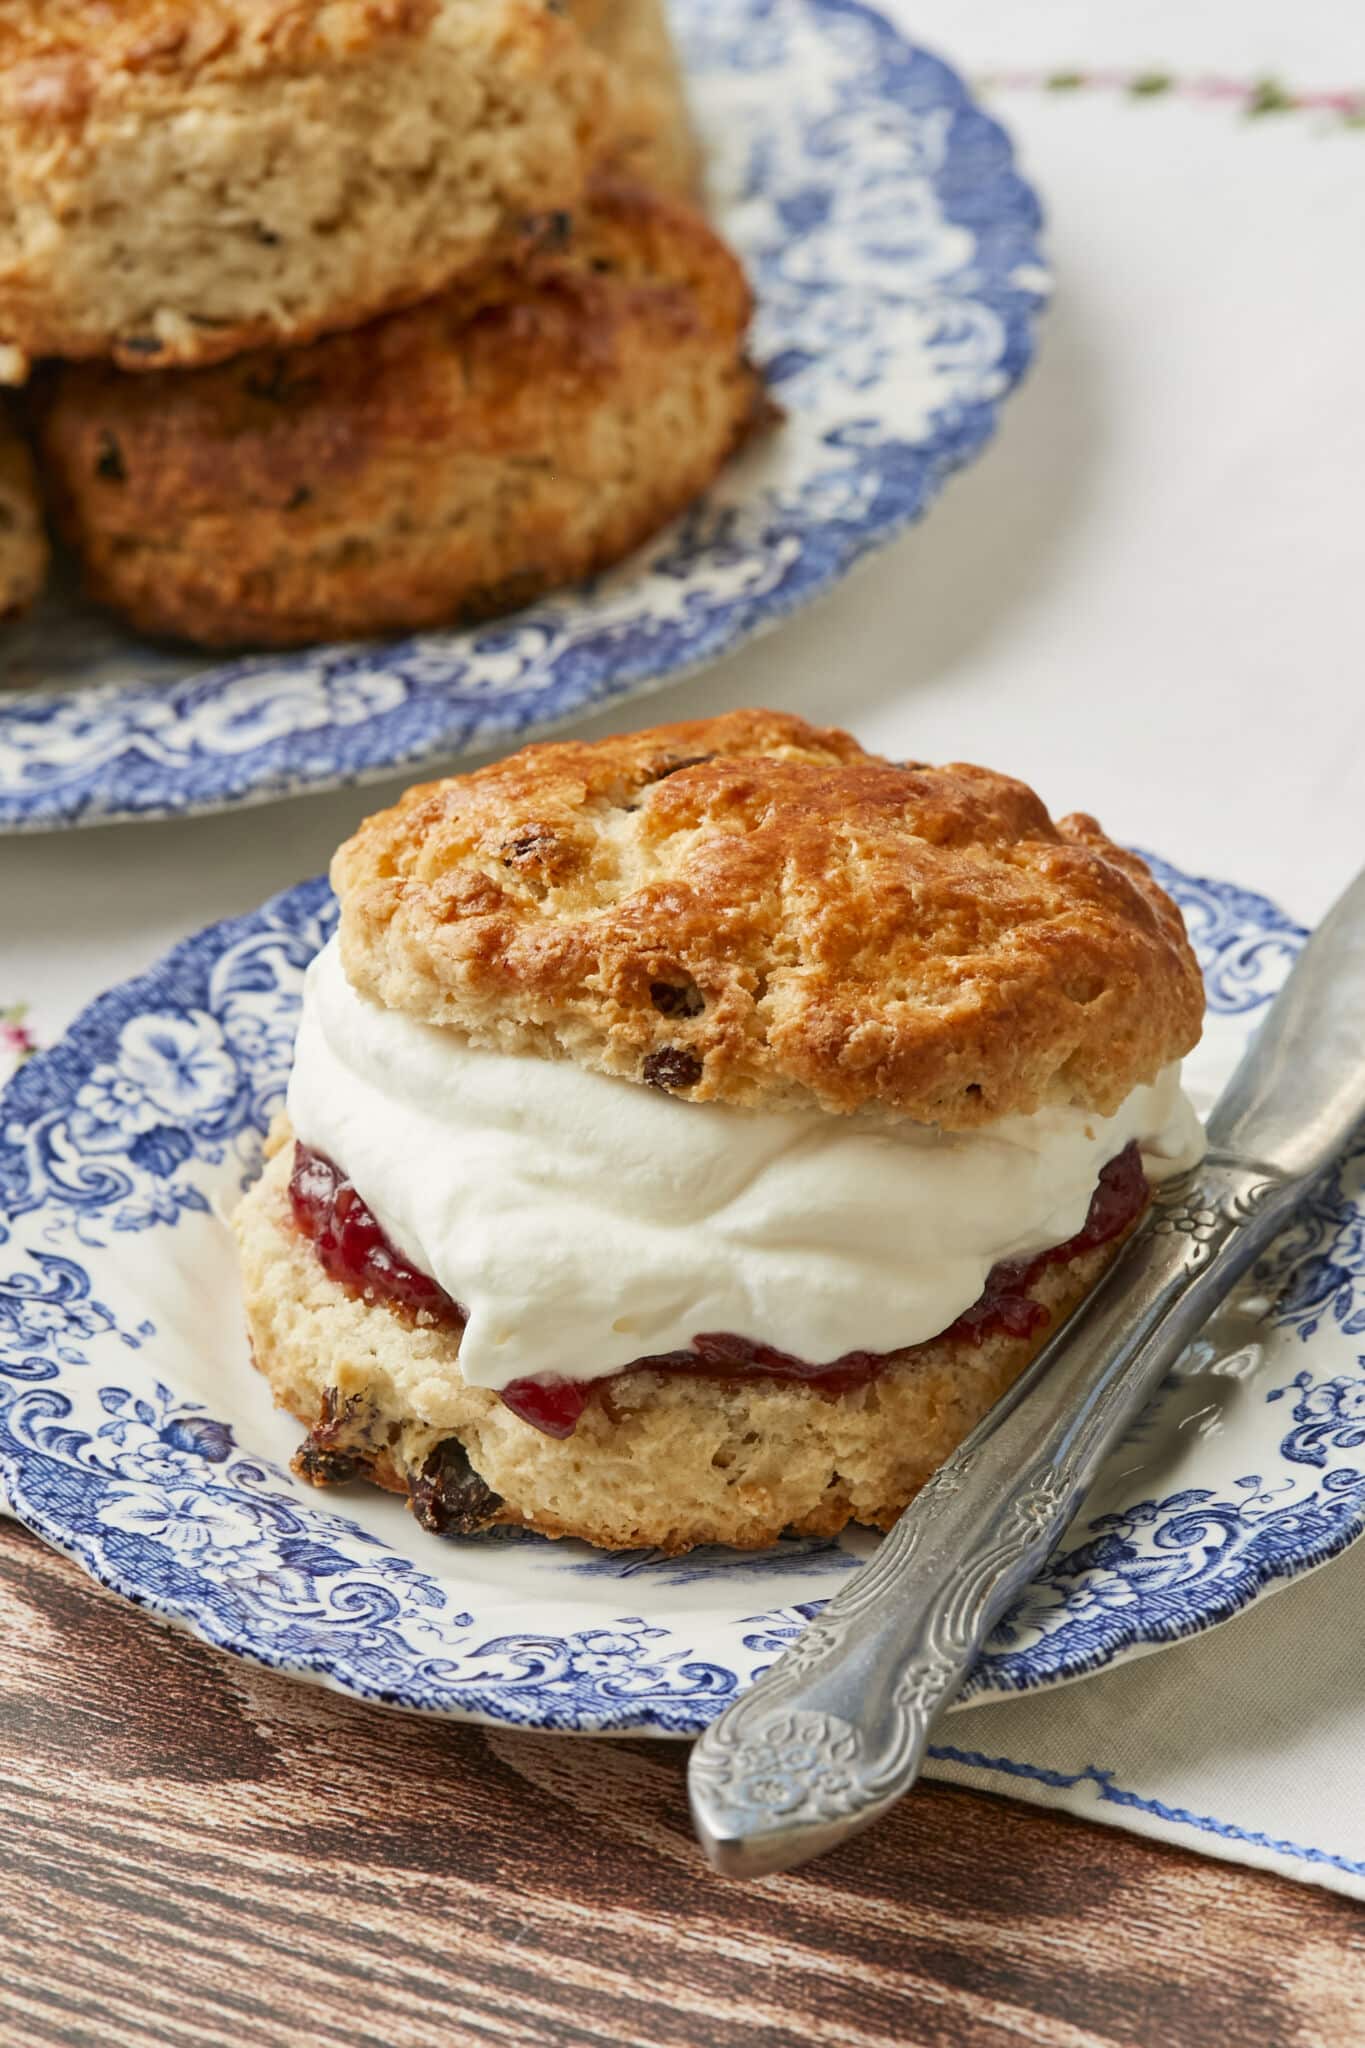 A golden, buttery, crumbly Best Ever Irish Scone is served with jam and whipped cream.